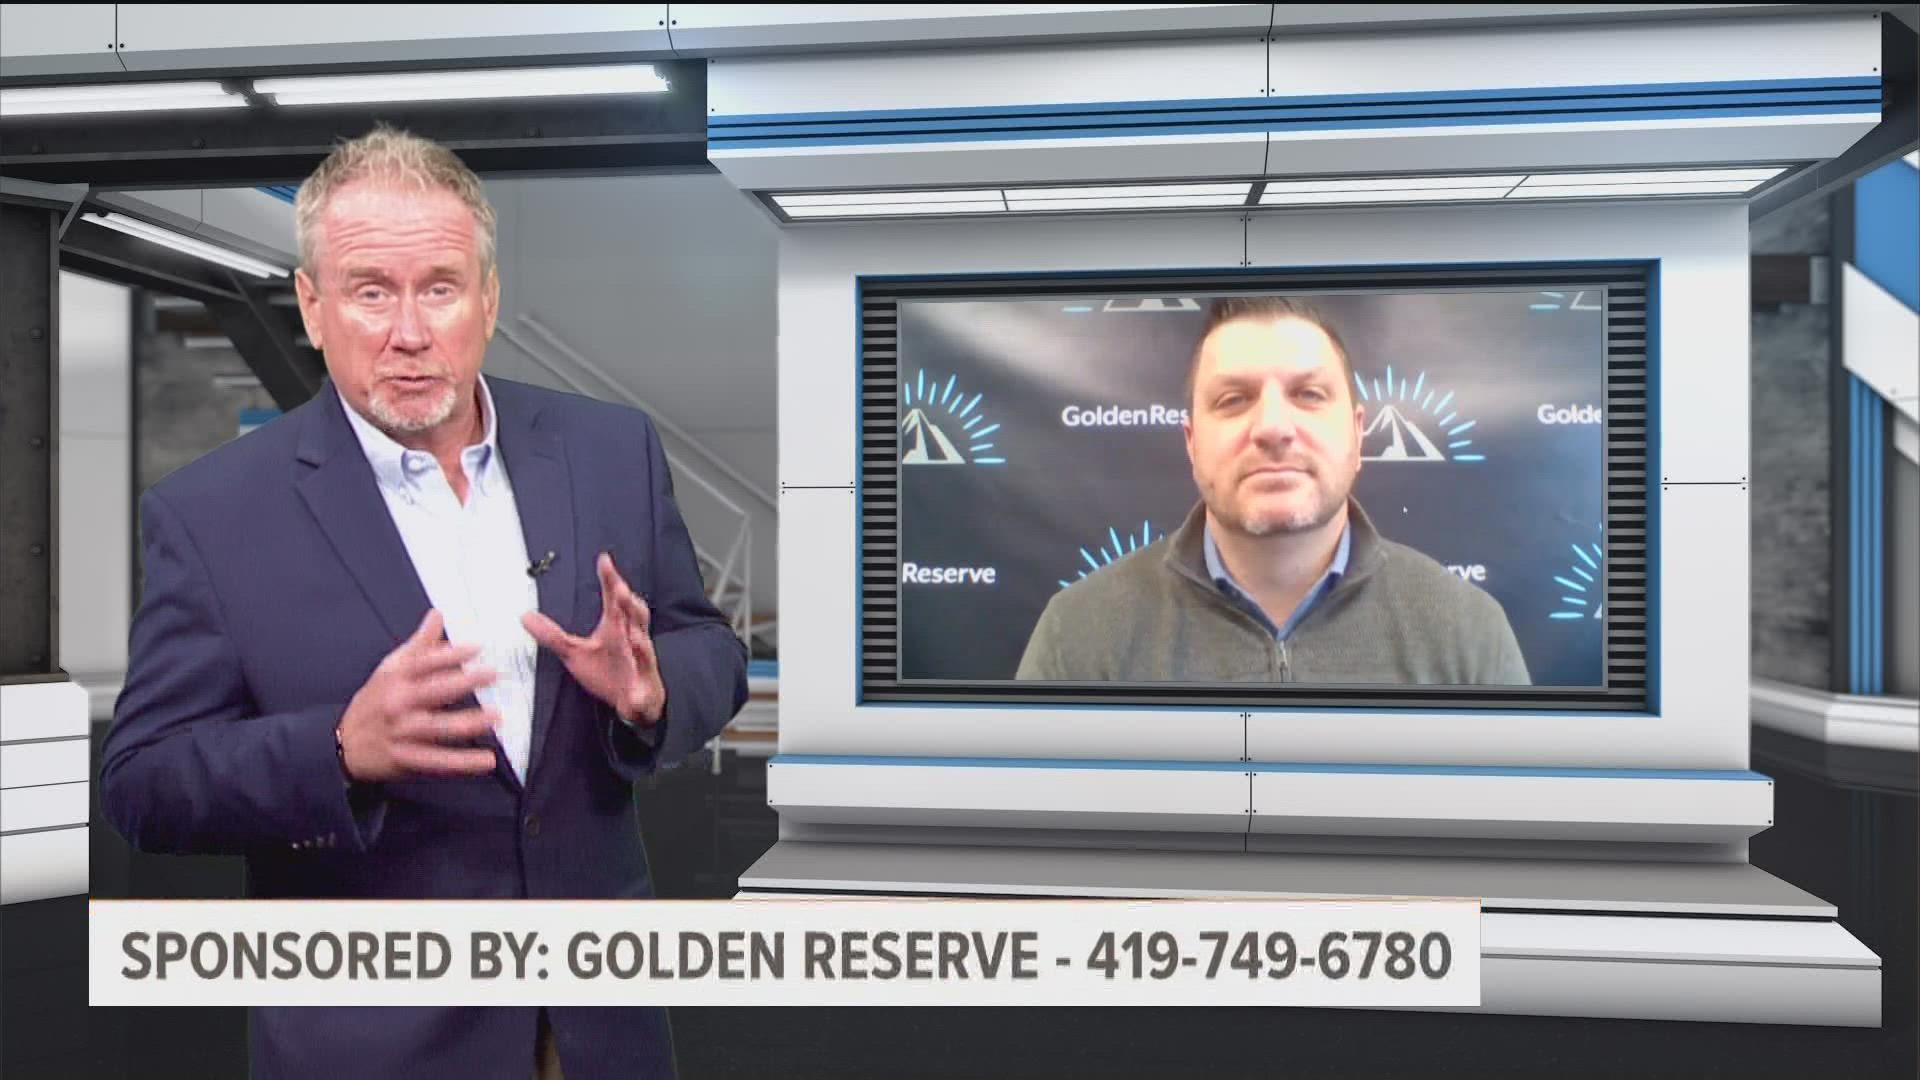 WTOL 11 sponsor Golden Reserve offers services to help retirees make a financial plan for the next phase of their life.